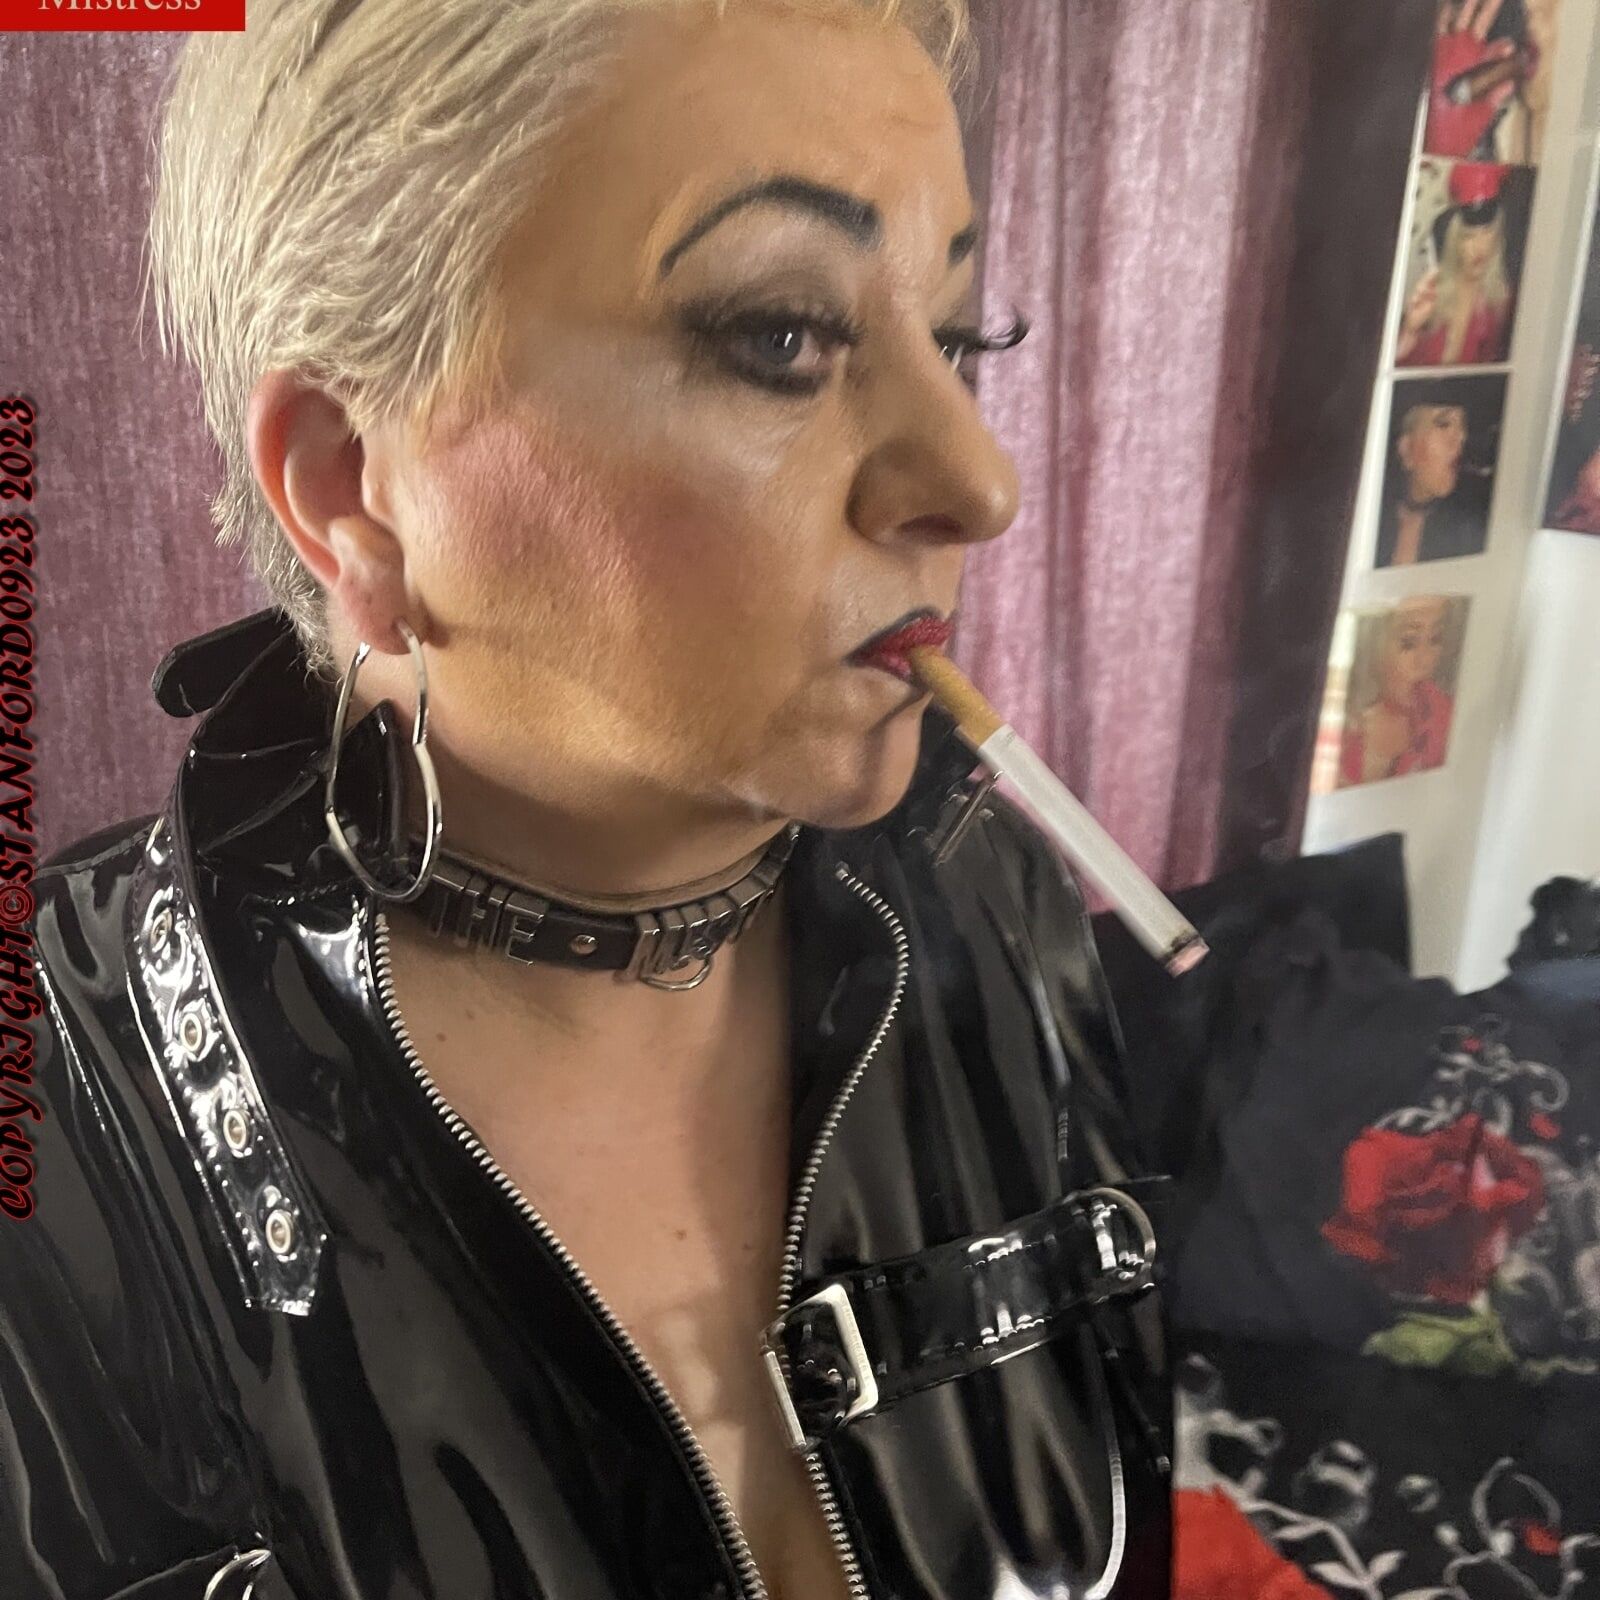 MISTRESS SHIRLEY IS READY SISSY TO FUCK YOU #3